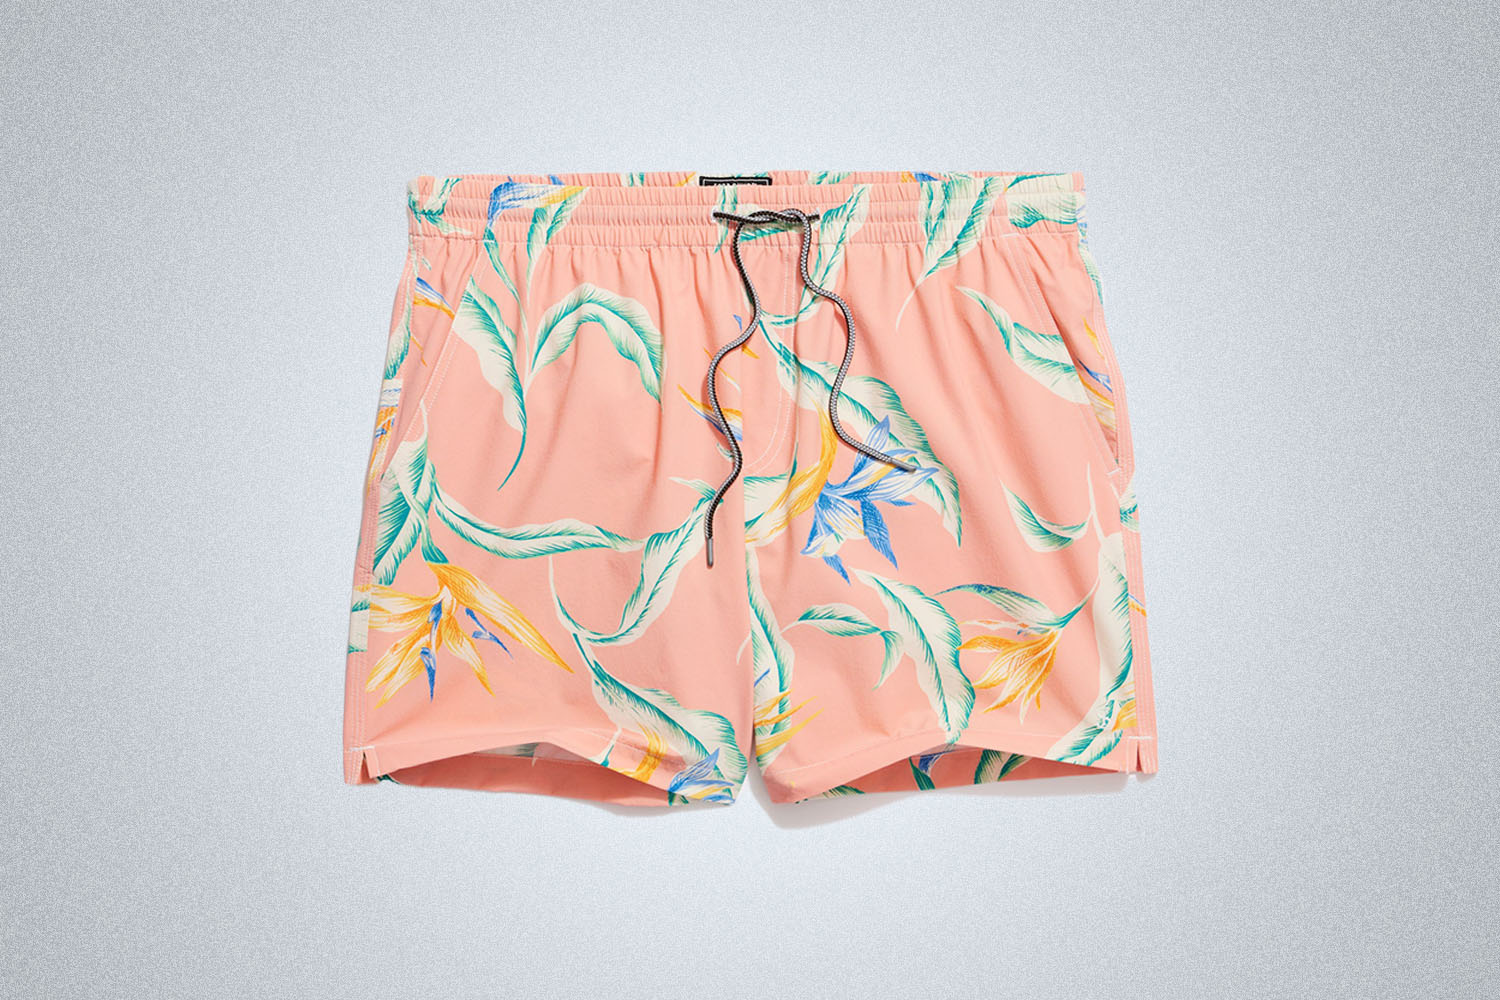 a pair of pink patterned swim trunks on a grey background